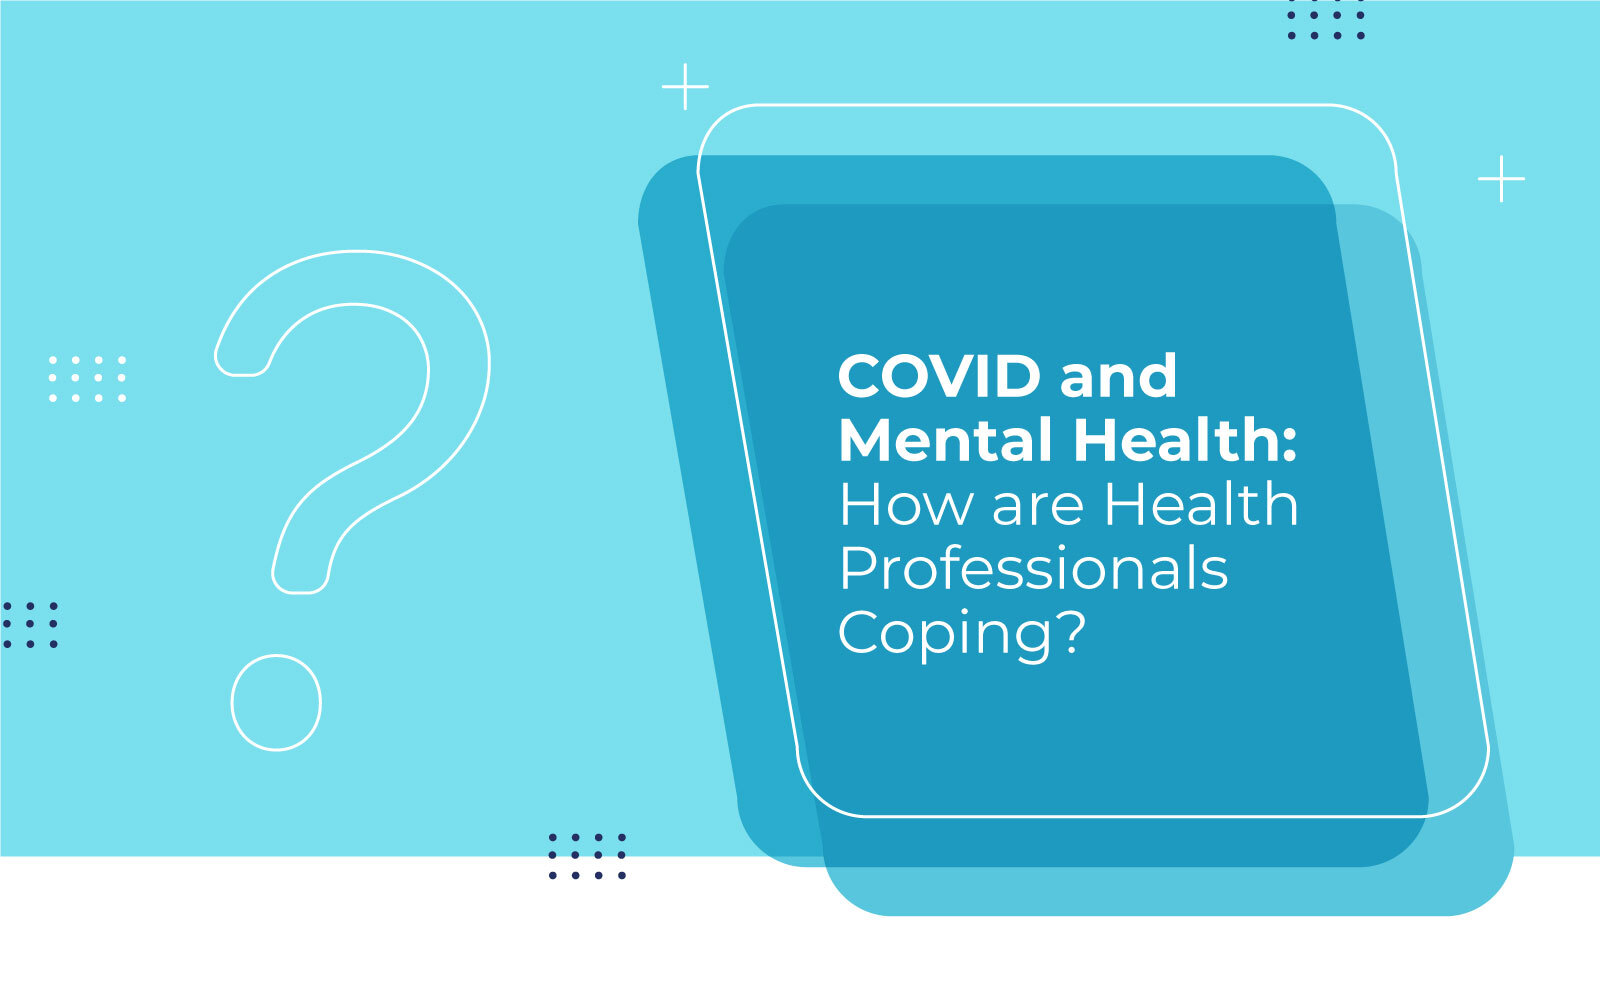 COVID and Mental Health: How are Health Professionals Coping?